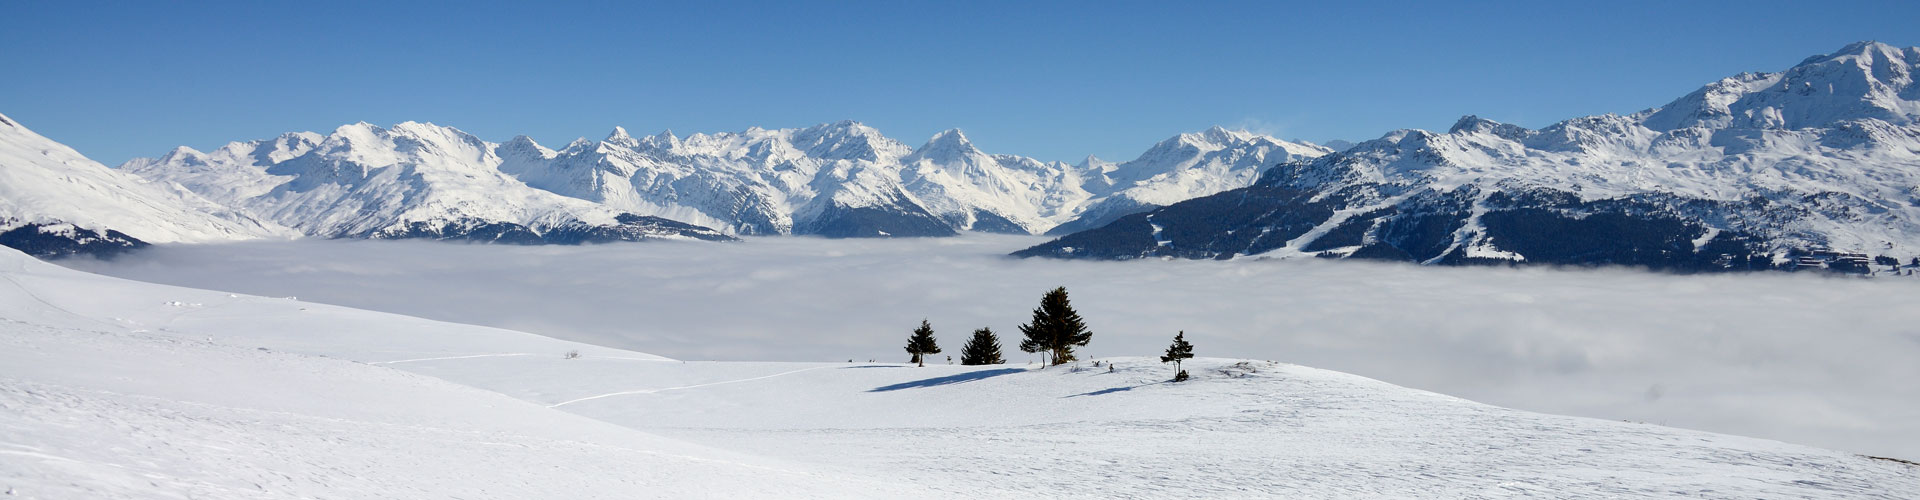 Snowshoe excursion to Peisey-Vallandry and Arcs 1800